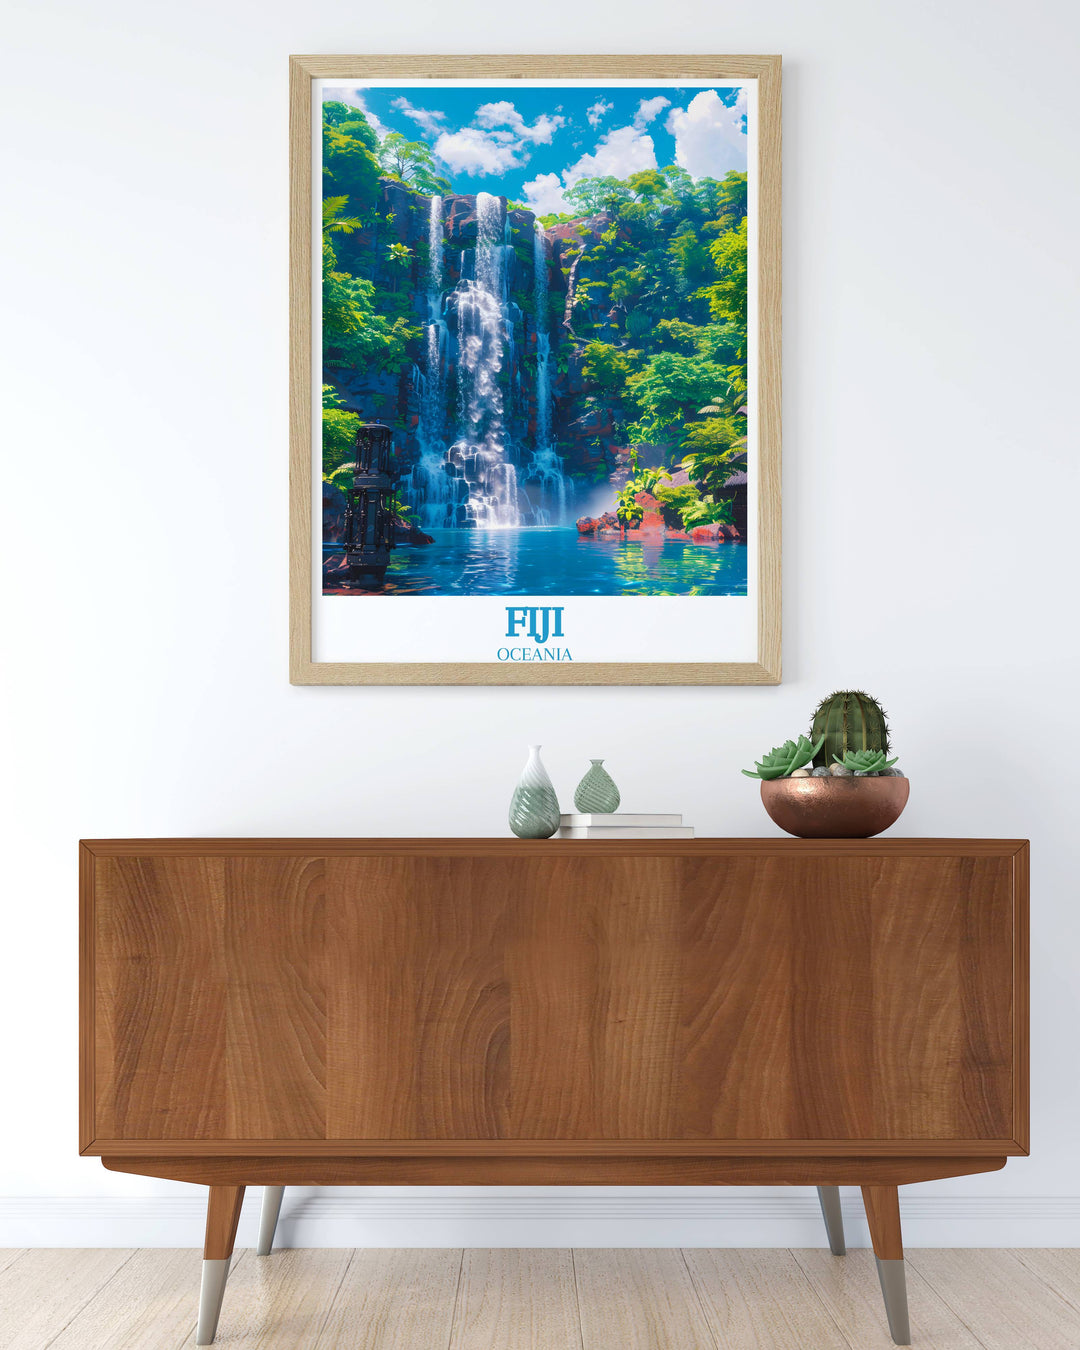 Unique Fiji Gift Artwork of Tavoro Falls a thoughtful present for art lovers and those mesmerized by the majestic landscapes of the South Pacific and Hawaii